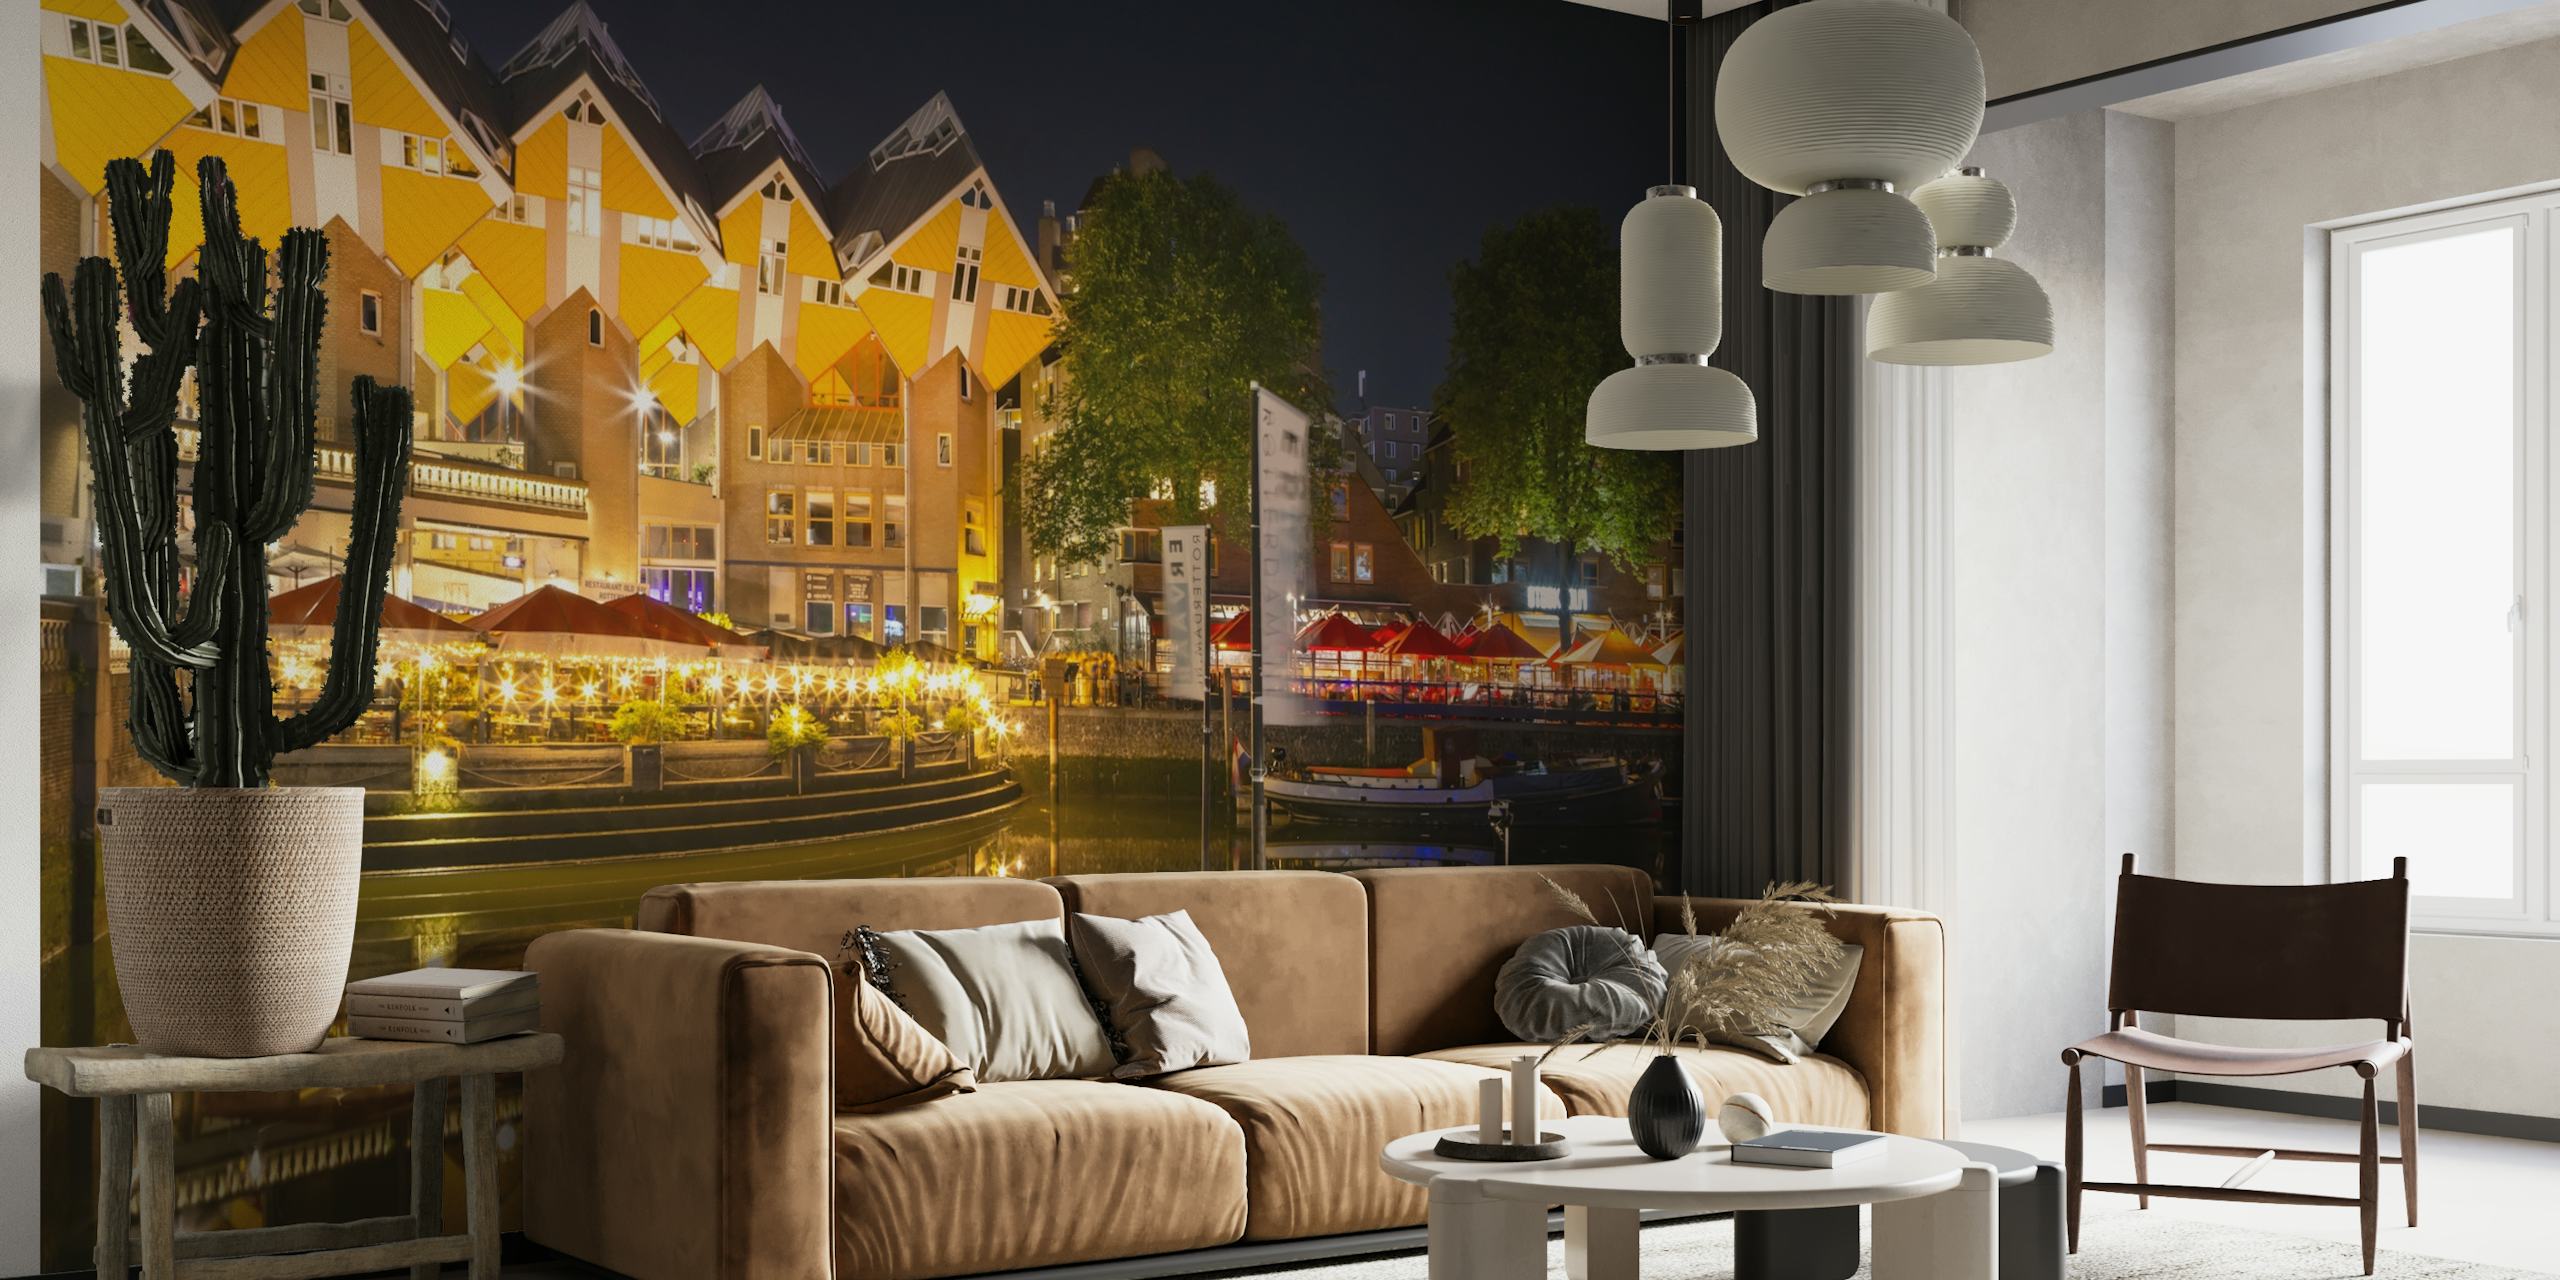 ROTTERDAM Oude Haven and Cube Houses by night behang